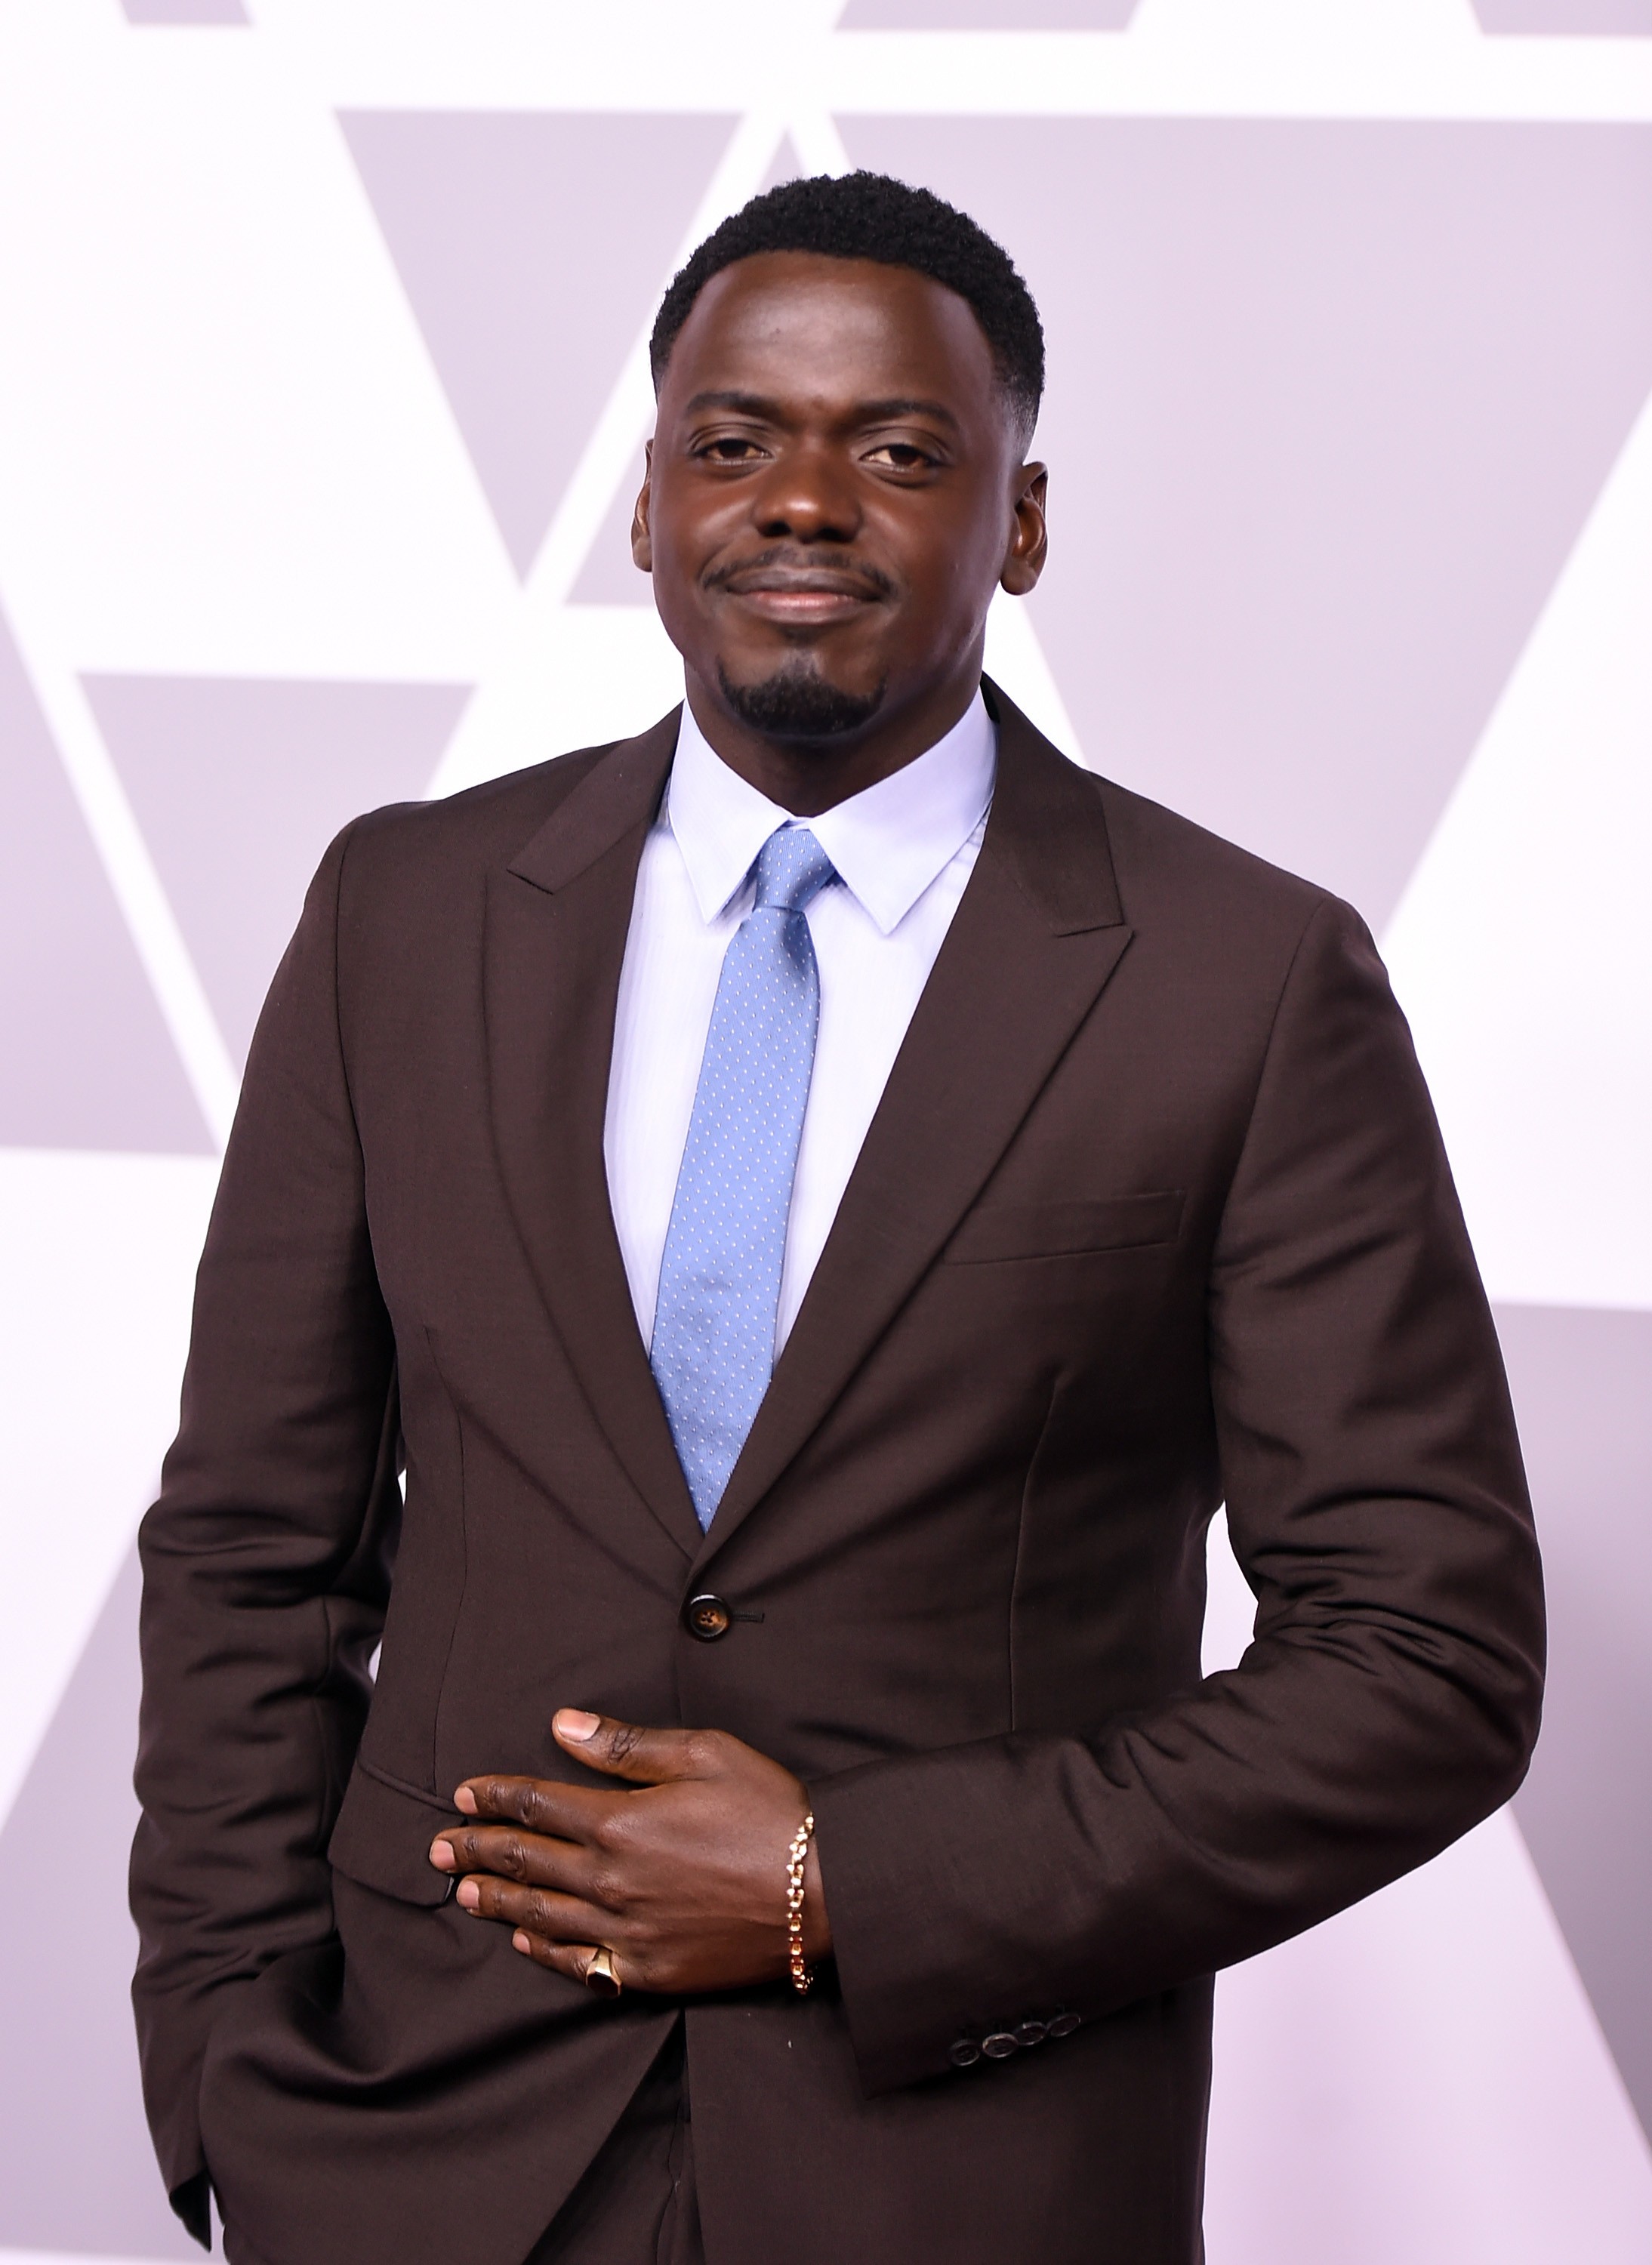 BEVERLY HILLS, CA - FEBRUARY 05: Actor Daniel Kaluuya attends the 90th Annual Academy Awards Nominee Luncheon at The Beverly Hilton Hotel on February 5, 2018 in Beverly Hills, California.  (Photo by Kevin Winter/Getty Images) (Foto: Getty Images)